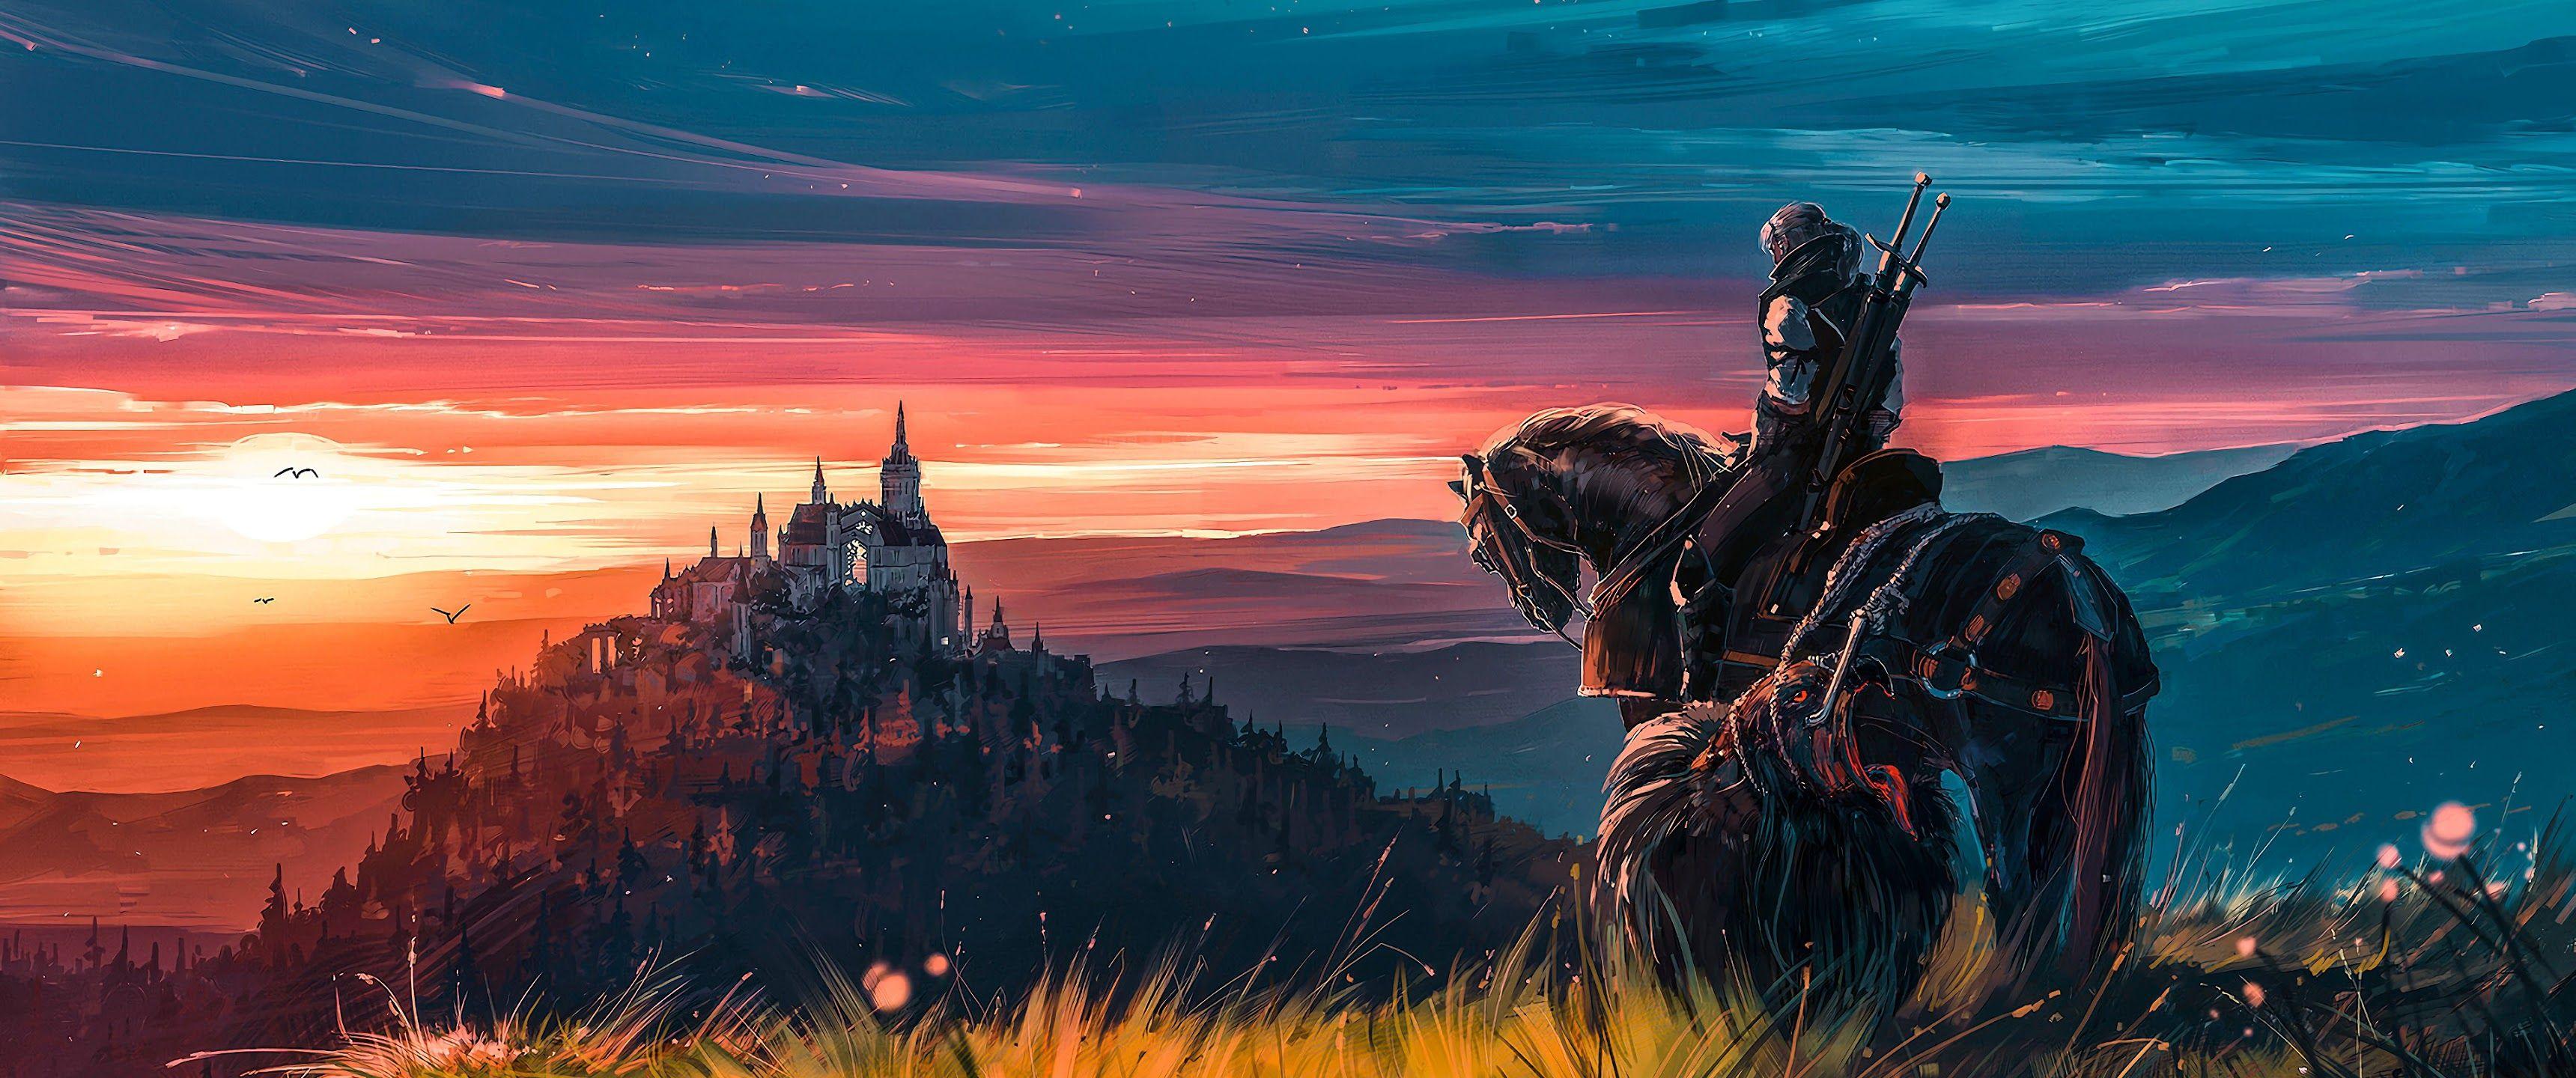 3440X1440 Witcher Wallpapers - Top Fre
e 3440X1440 Witcher Backgrounds